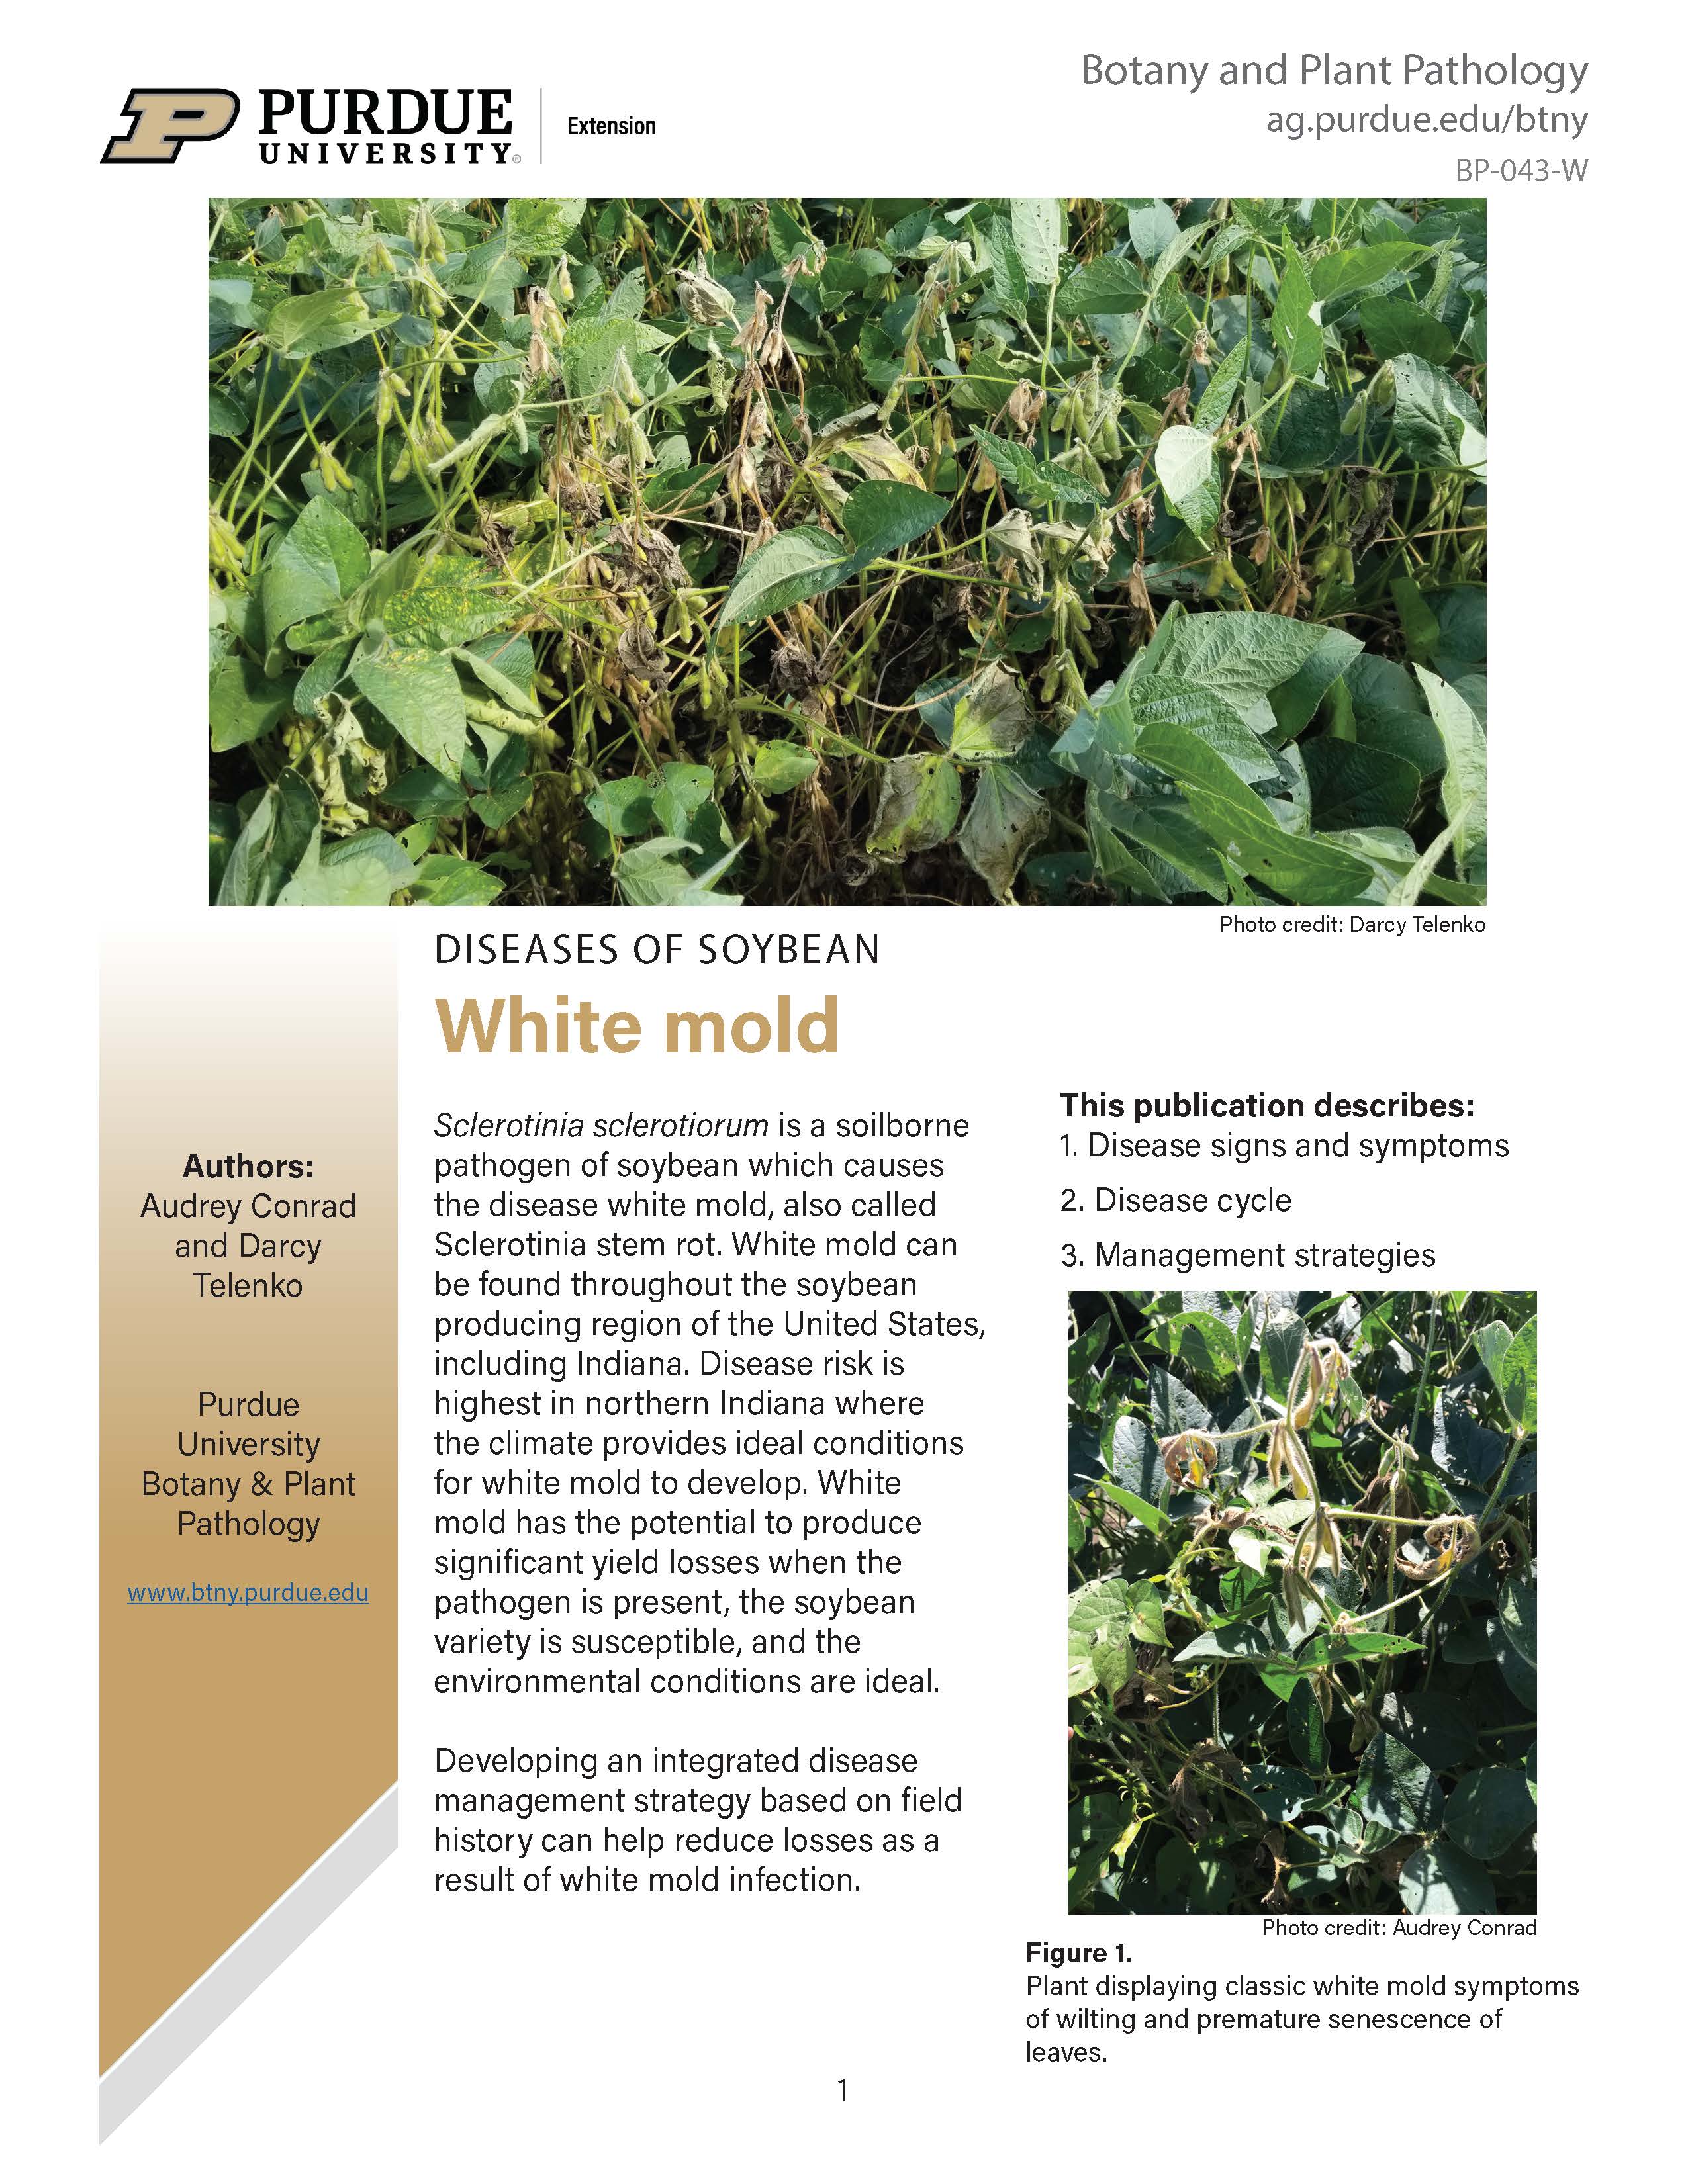 Diseases of Soybean: White Mold